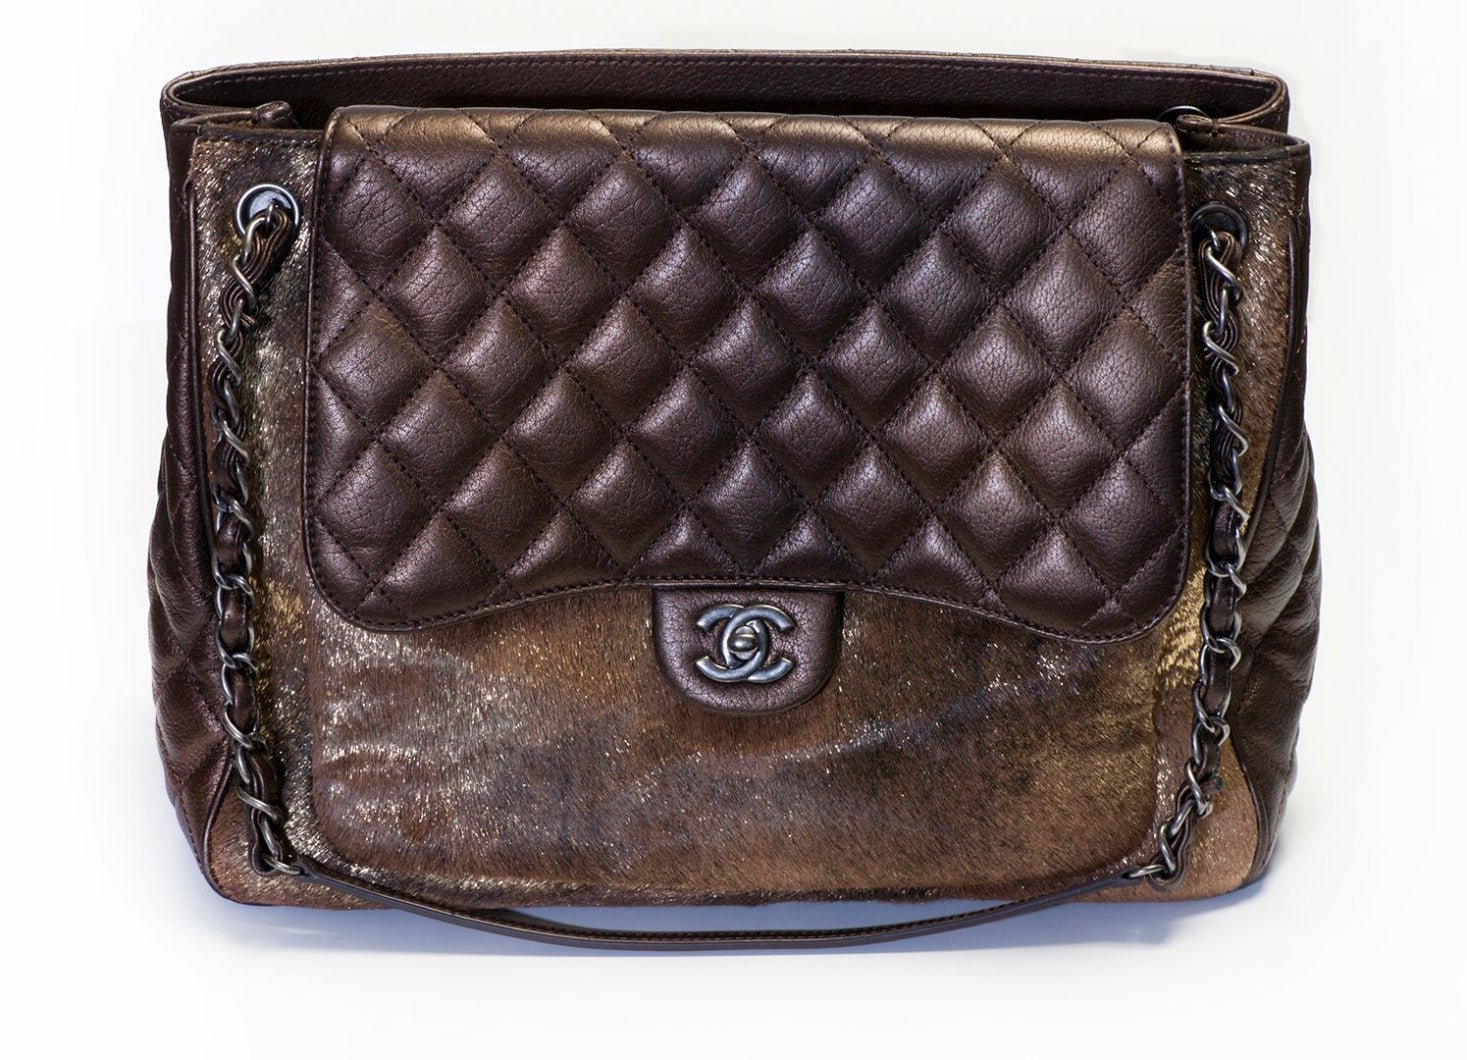 CHANEL Paris 2015 Brown Ombré Quilted Leather Mink Fur Tote Bag - DSF Antique Jewelry